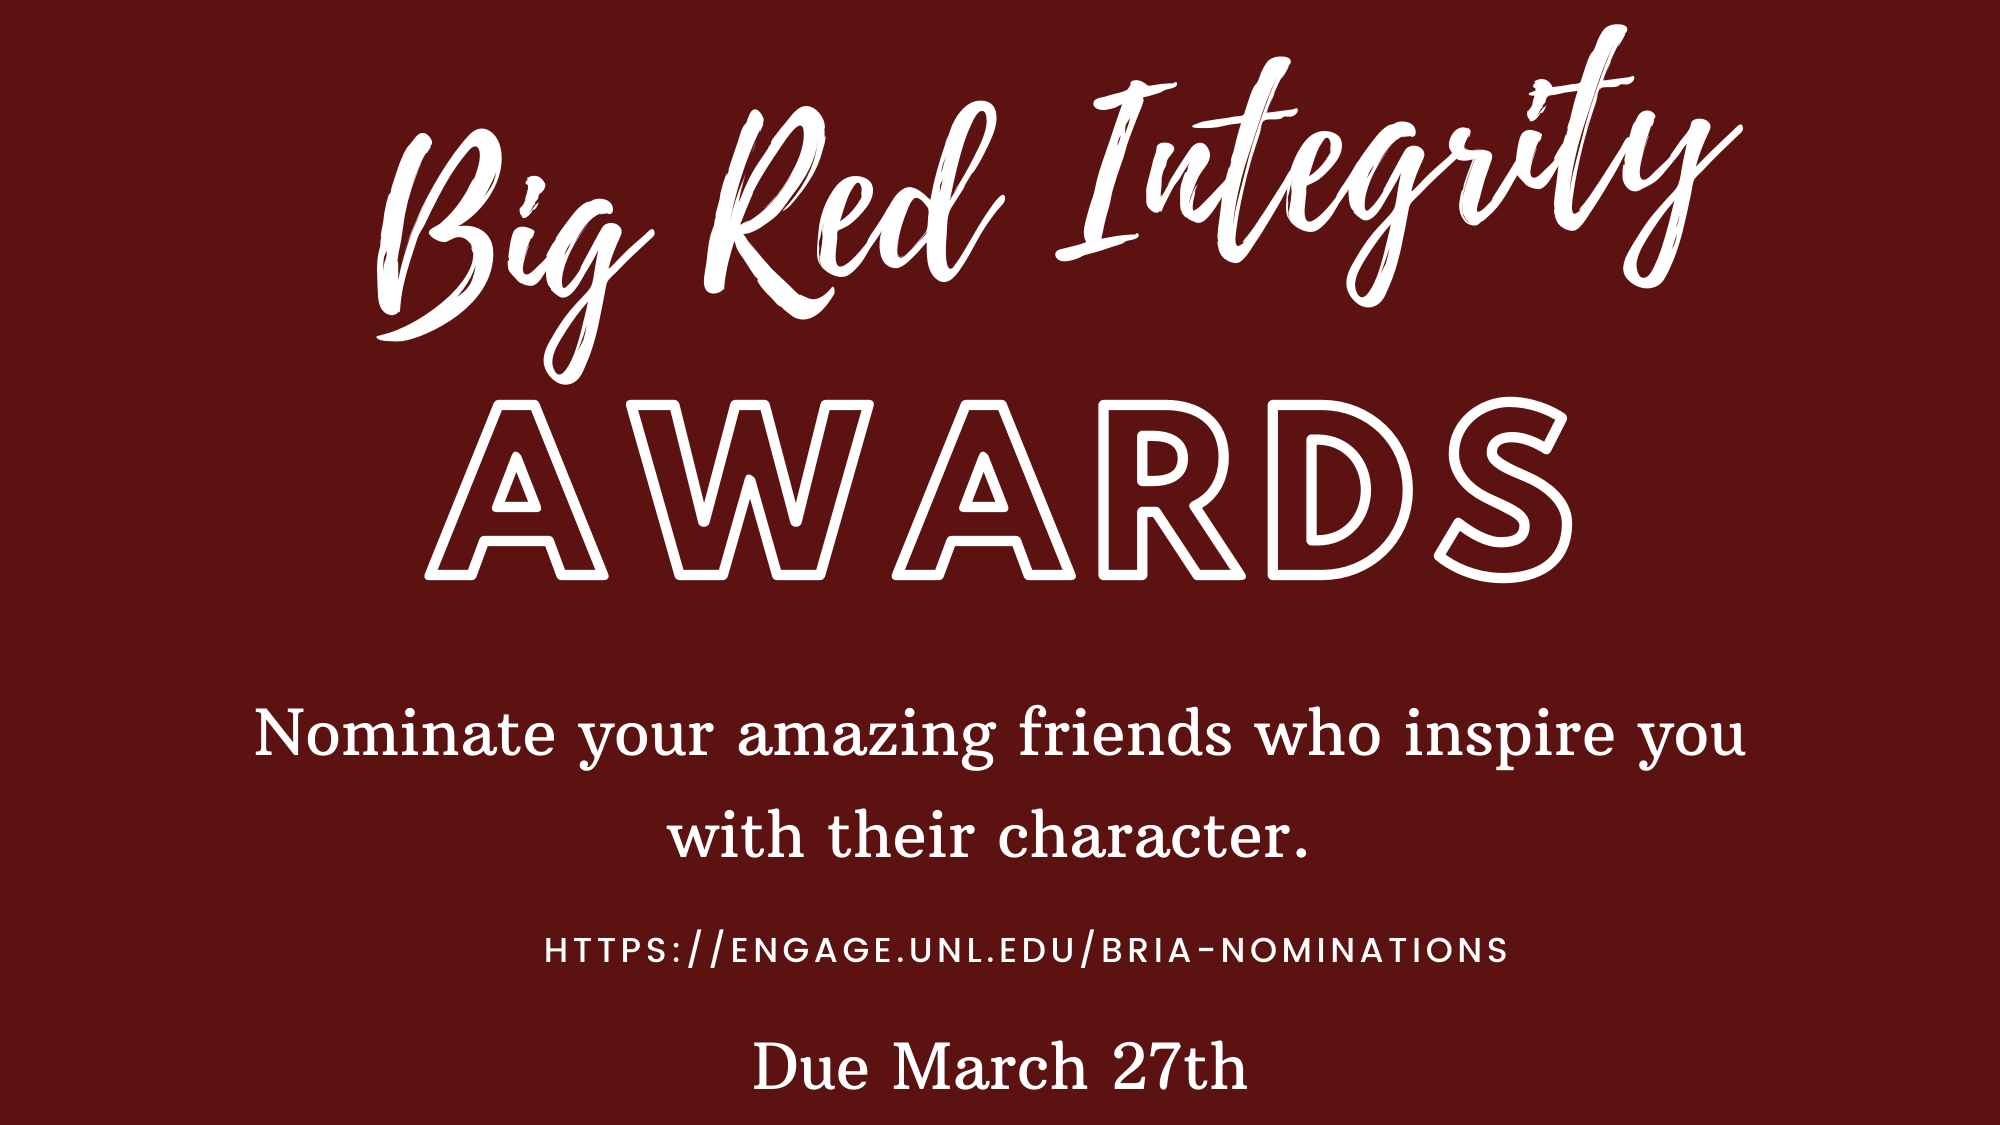 Big Red Integrity Awards graphic